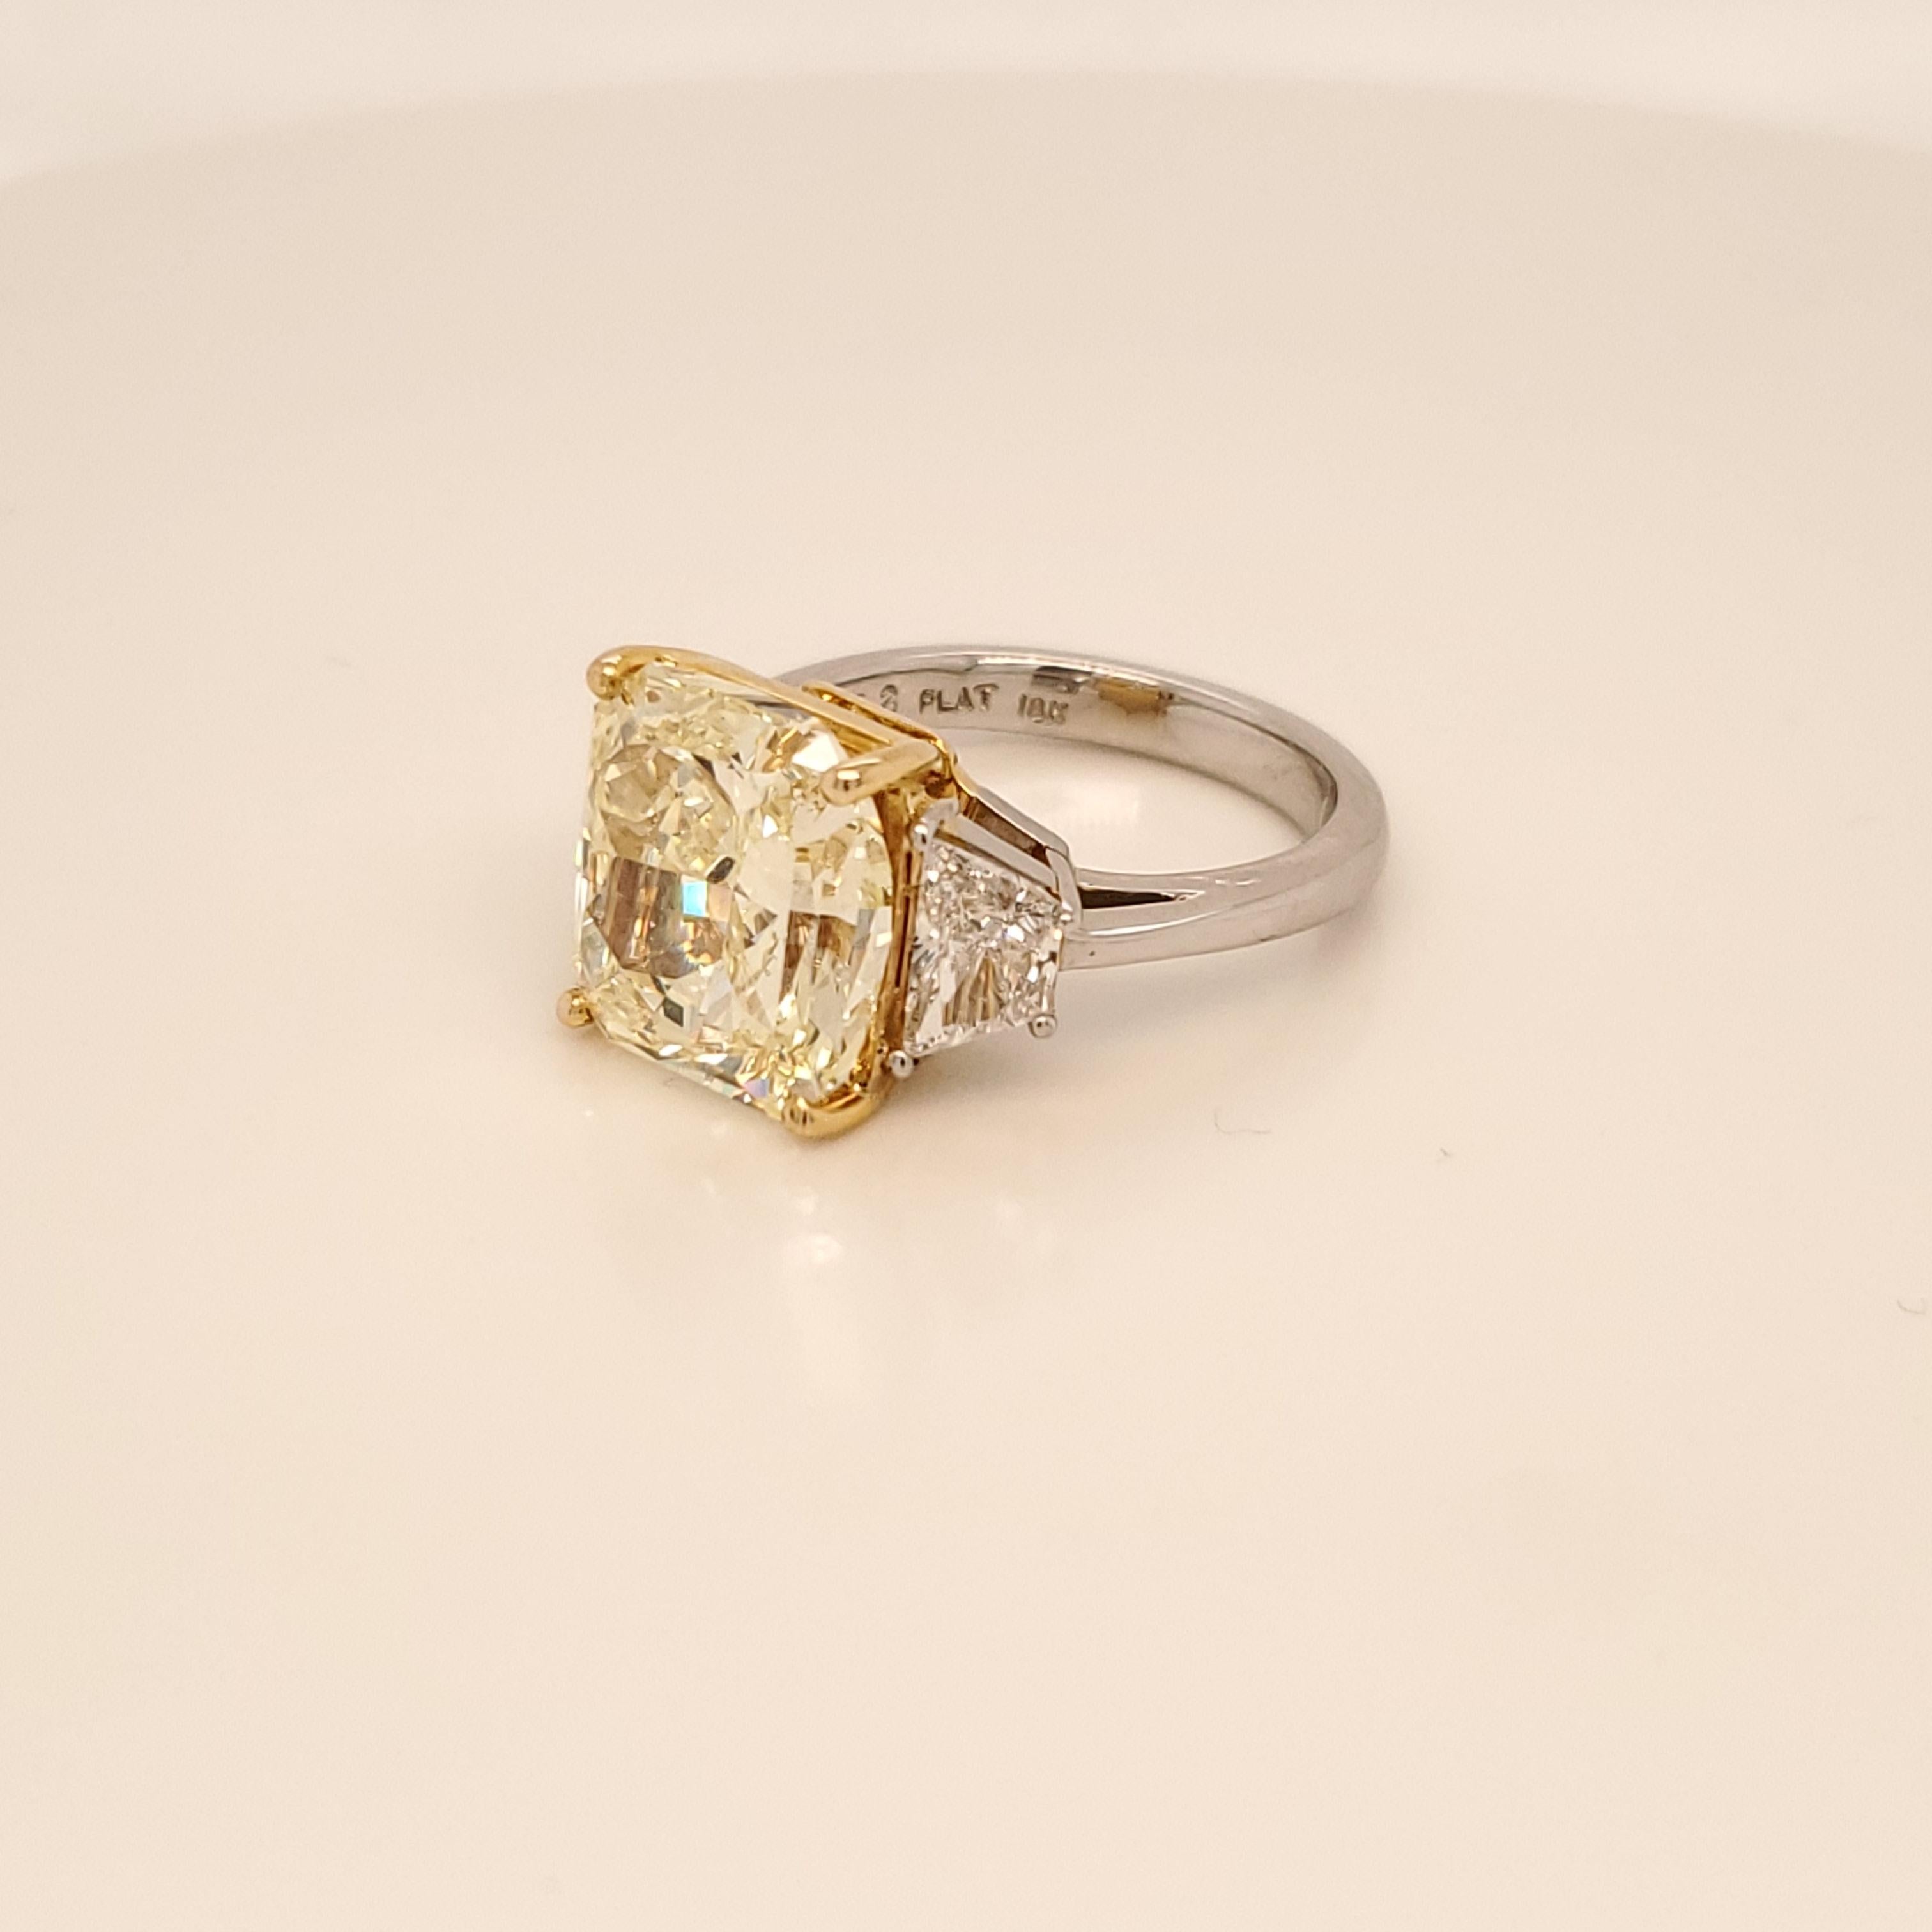 Here we have an extremely hard to find Radiant Cut 6.69 carats Fancy Yellow in color and Internally Flawless in clarity GIA certified. Set in a Platinum and 18 Karat yellow Gold ring with two trapezoid shaped diamonds as side stones weighing 0.92